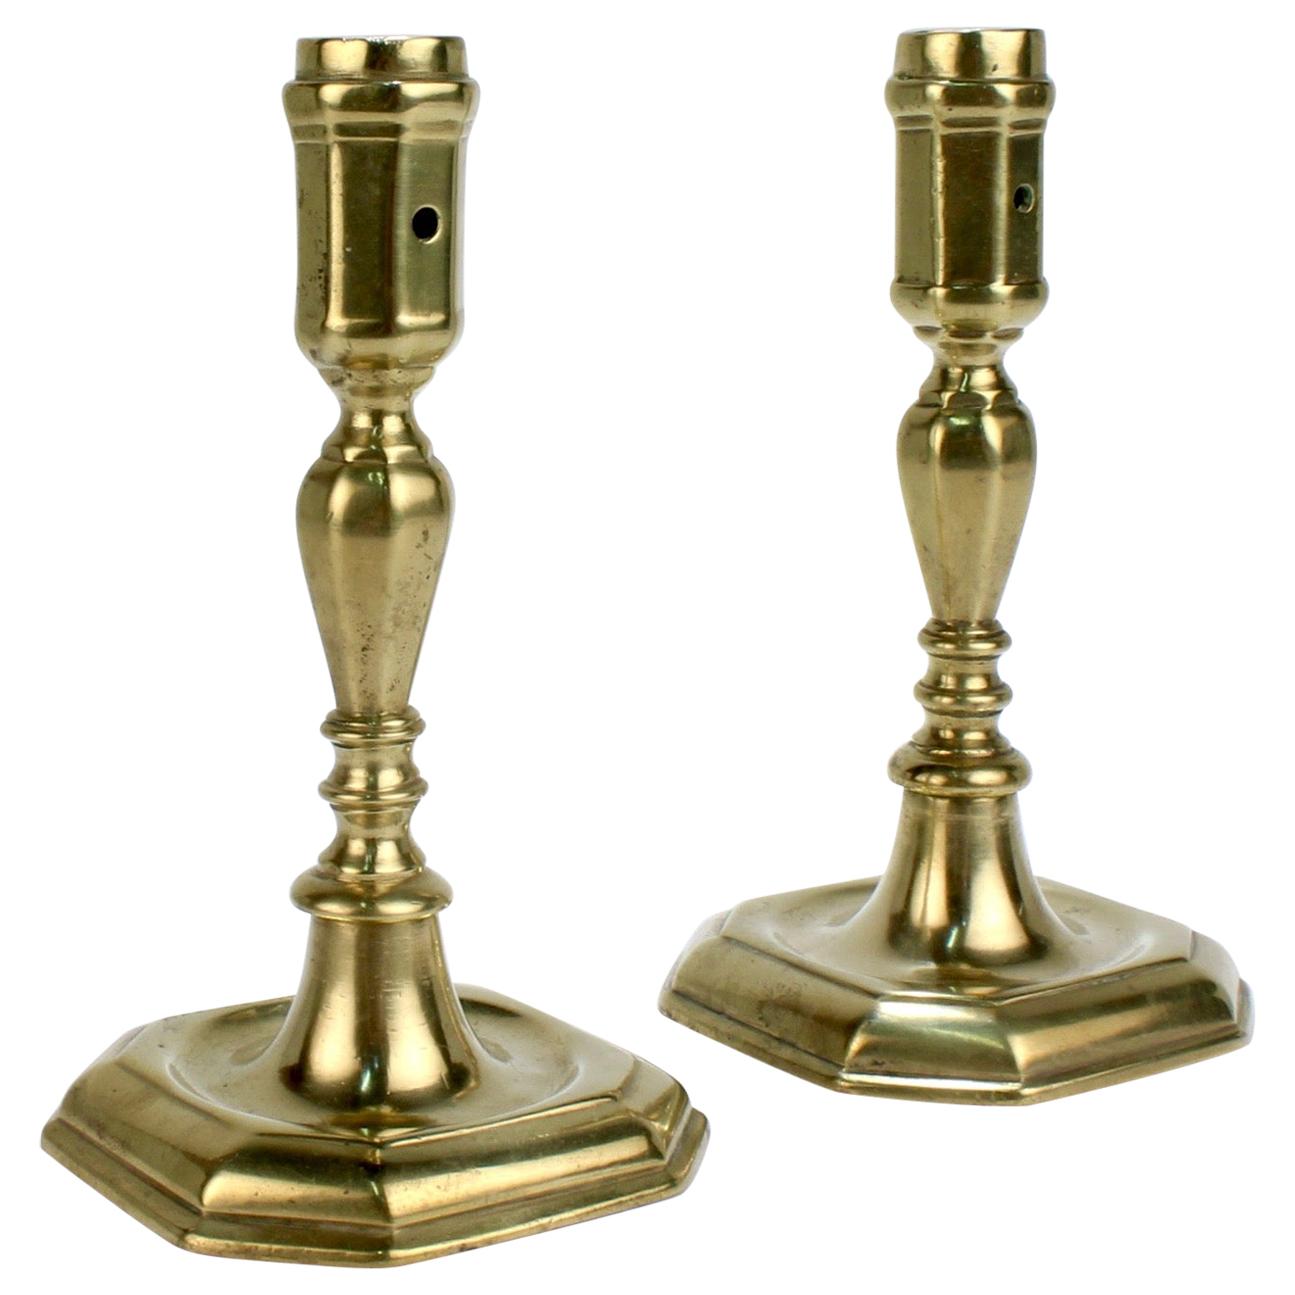 Pair of Early 18th Century French or English Faceted Brass Candlesticks